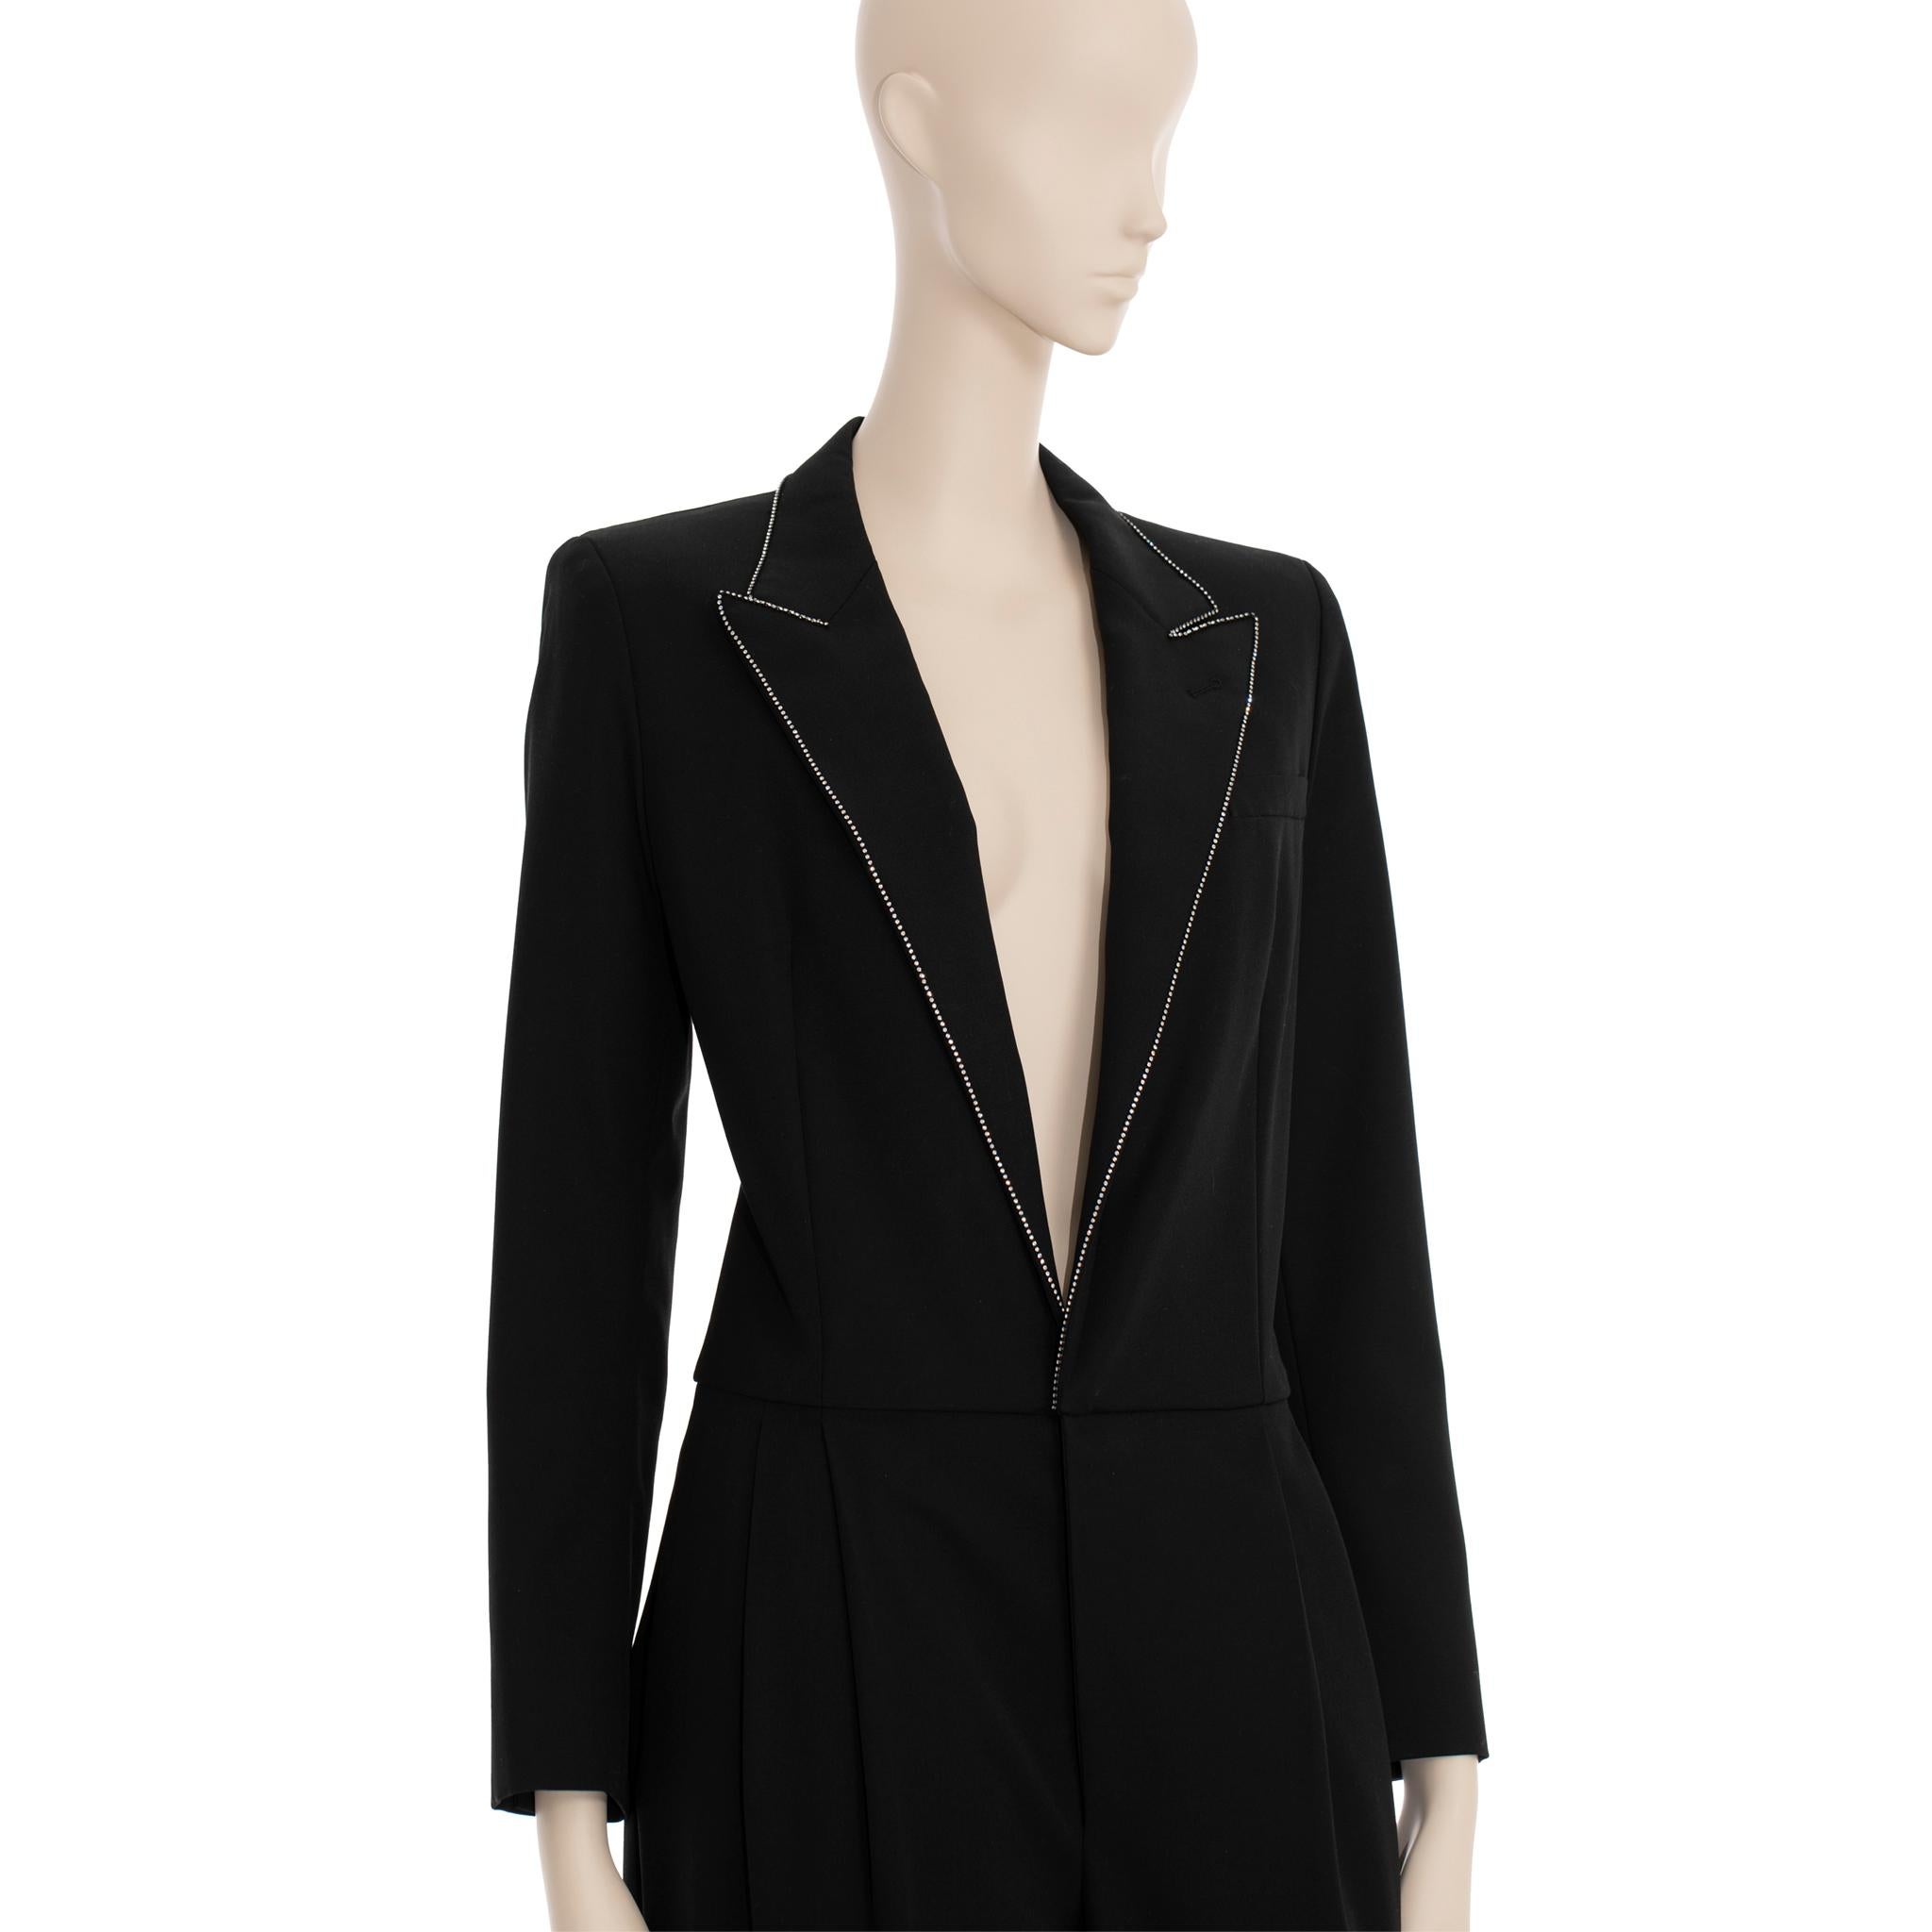 This Saint Laurent jumpsuit offers a stylish and sophisticated look that is perfect for formal events. Cut in a tuxedo style, this jumpsuit is adorned with crystal detailing on the chest and cuffs for an added glamorous touch. Available in a French